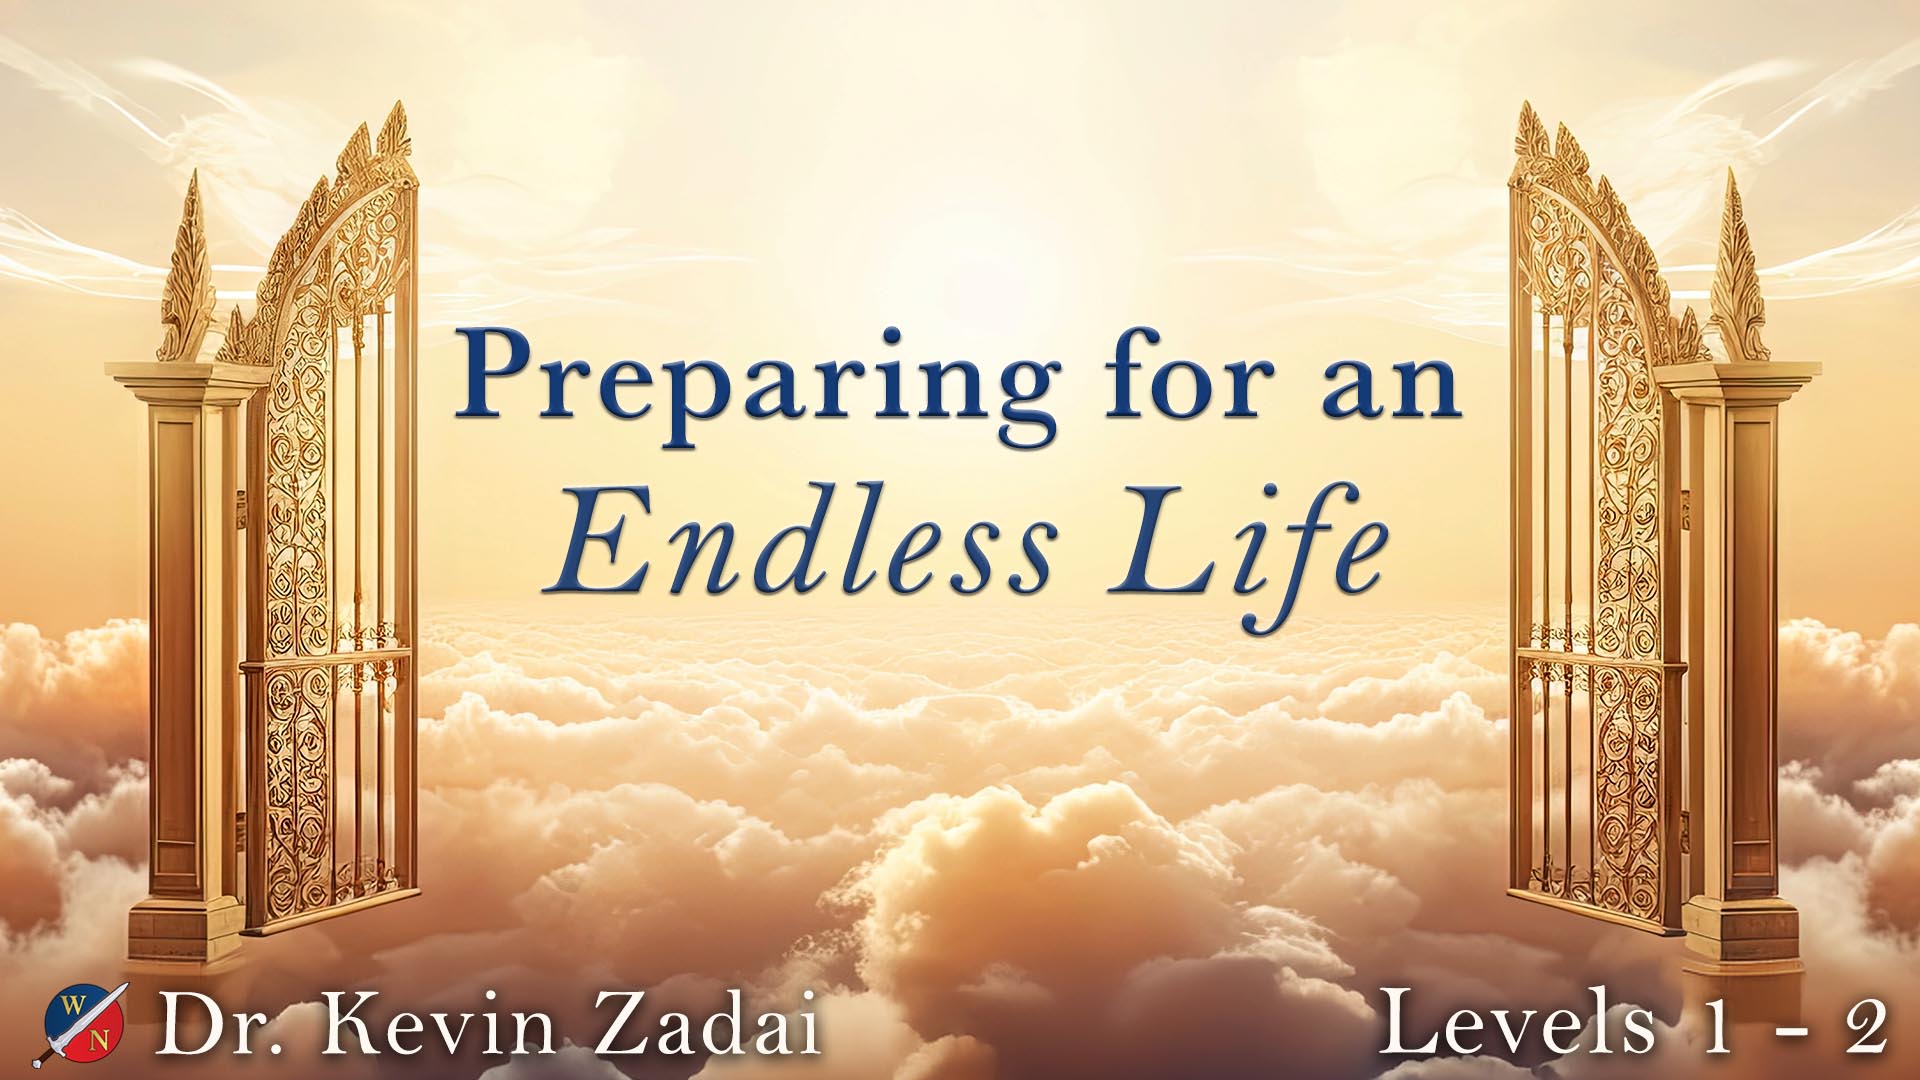 Preparing for an Endless Life course image